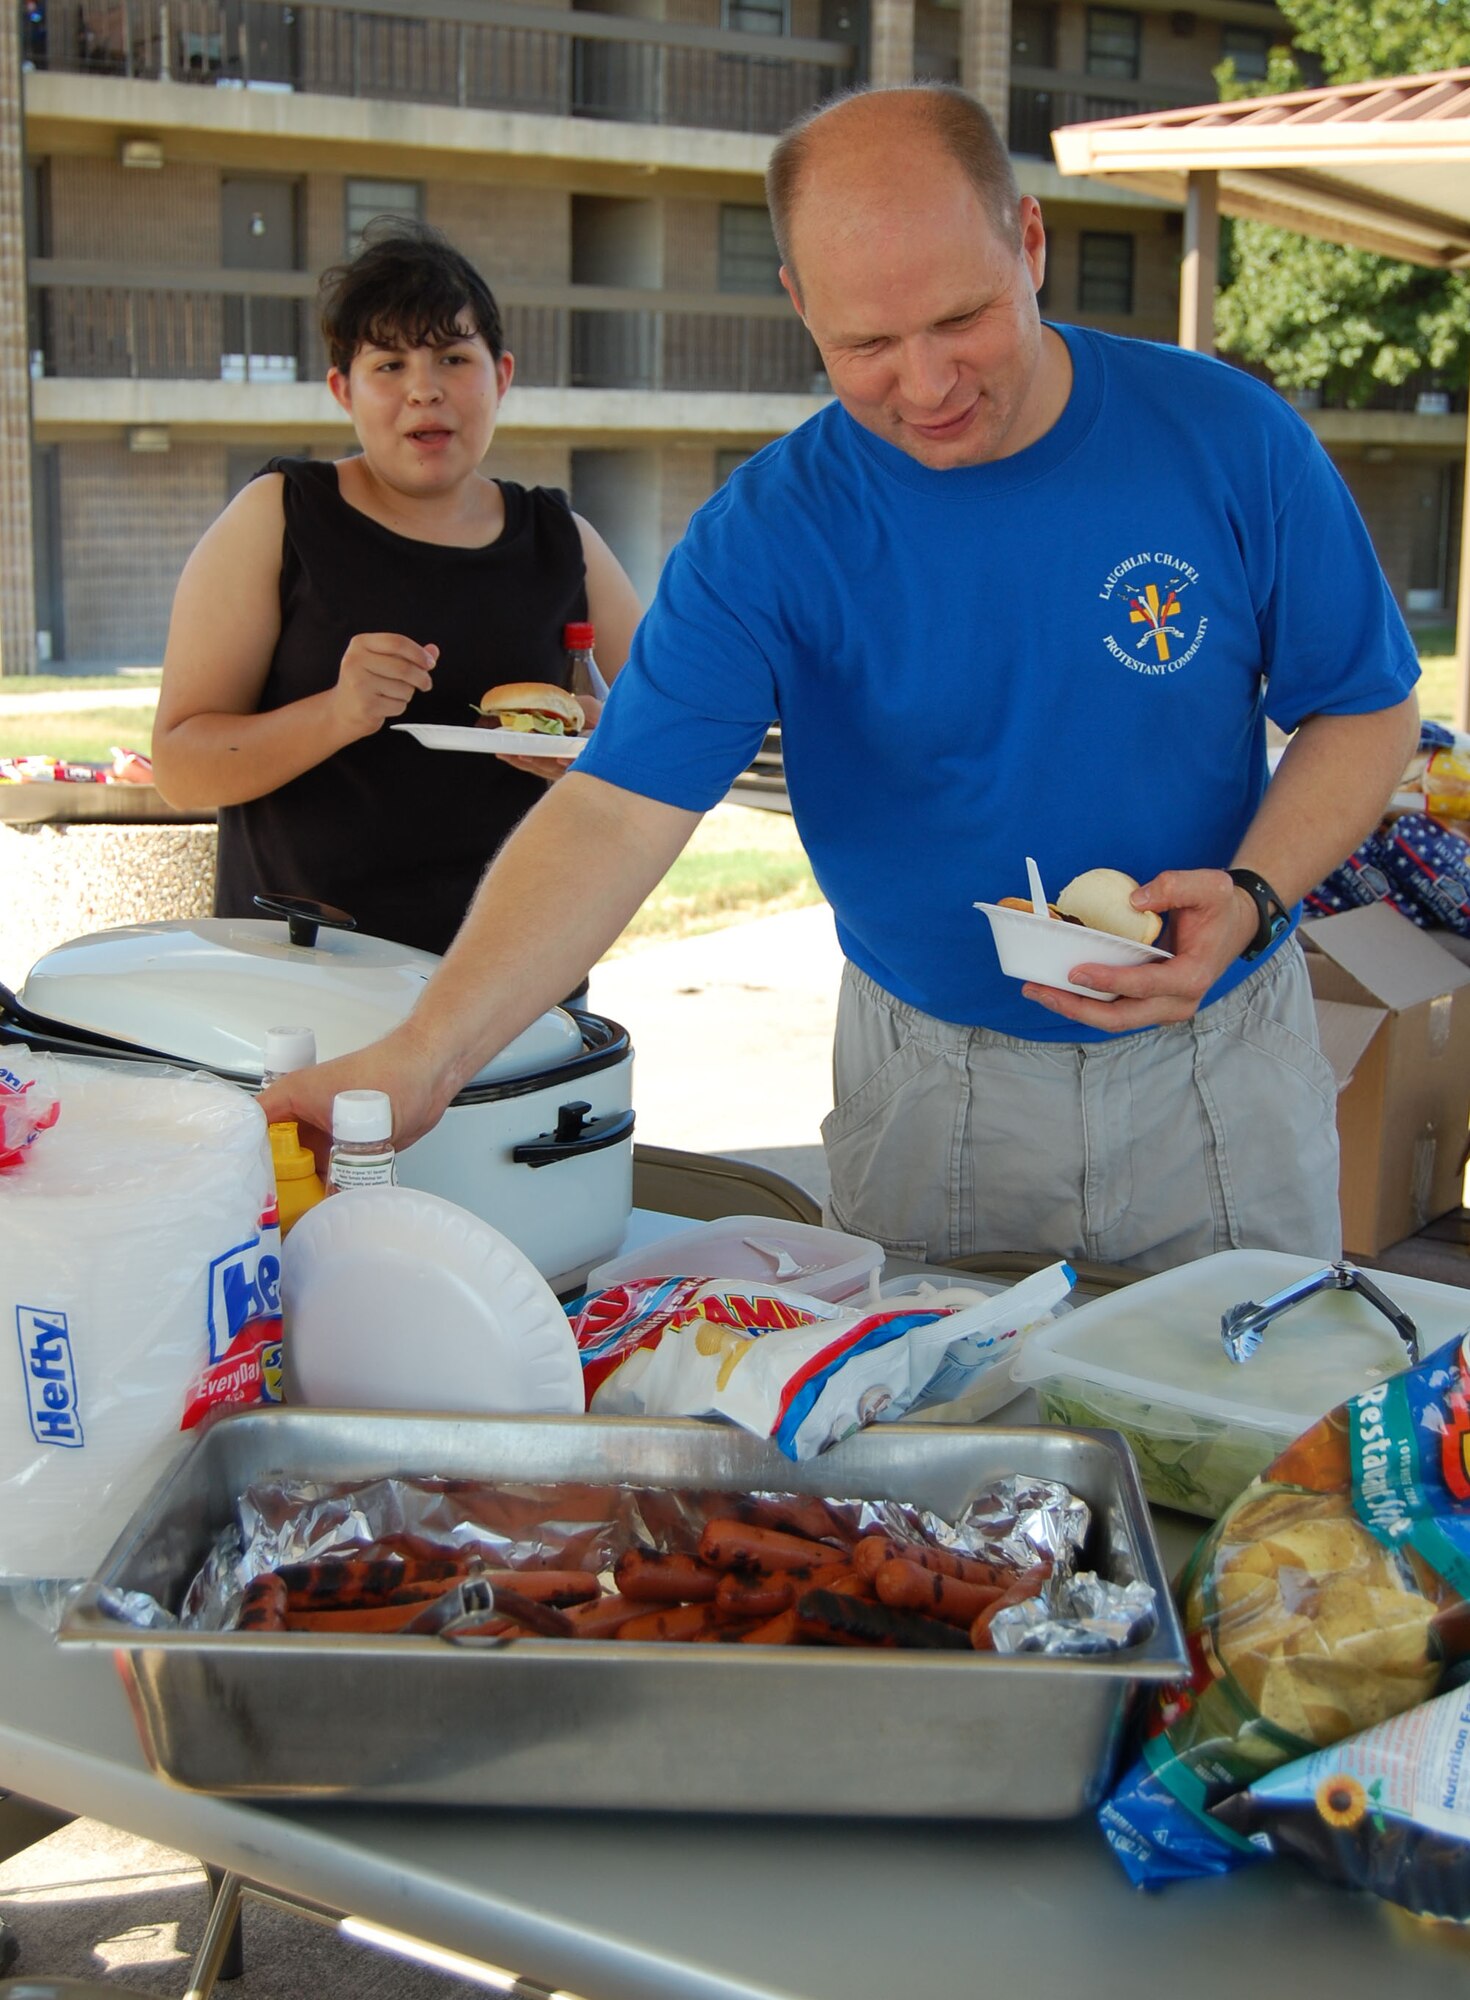 LAUGHLIN AIR FORCE BASE, Texas -- Chaplain (Capt.) Shannon Workman, helps prepare food at the "Cookout Delux" Friday. Chaplain Workman held this social gathering for all single Airmen living in the dorms here. There was an abundance of food and people in order for Airmen to stick around to get better acquainted and take advantage of the nice weather. 

